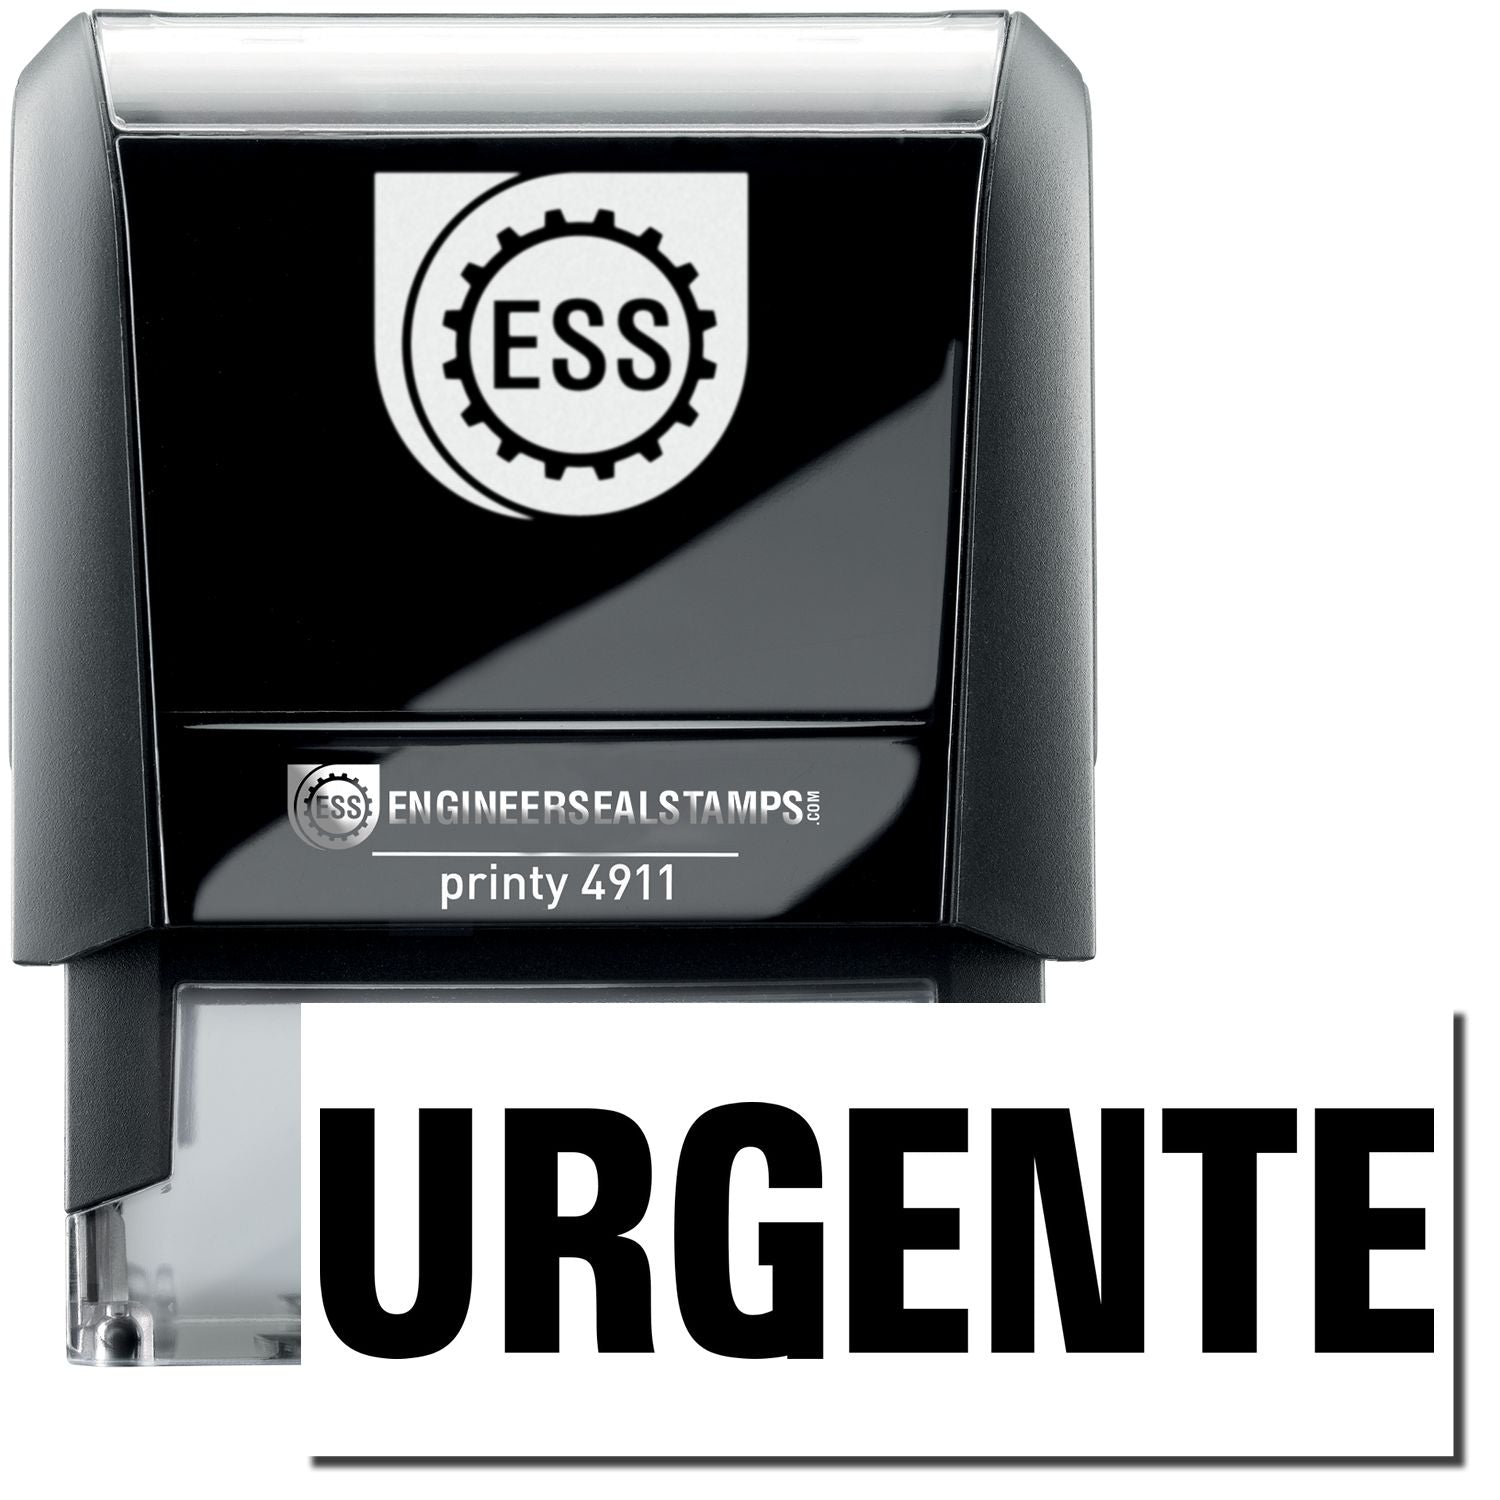 A self-inking stamp with a stamped image showing how the text "URGENTE" is displayed after stamping.